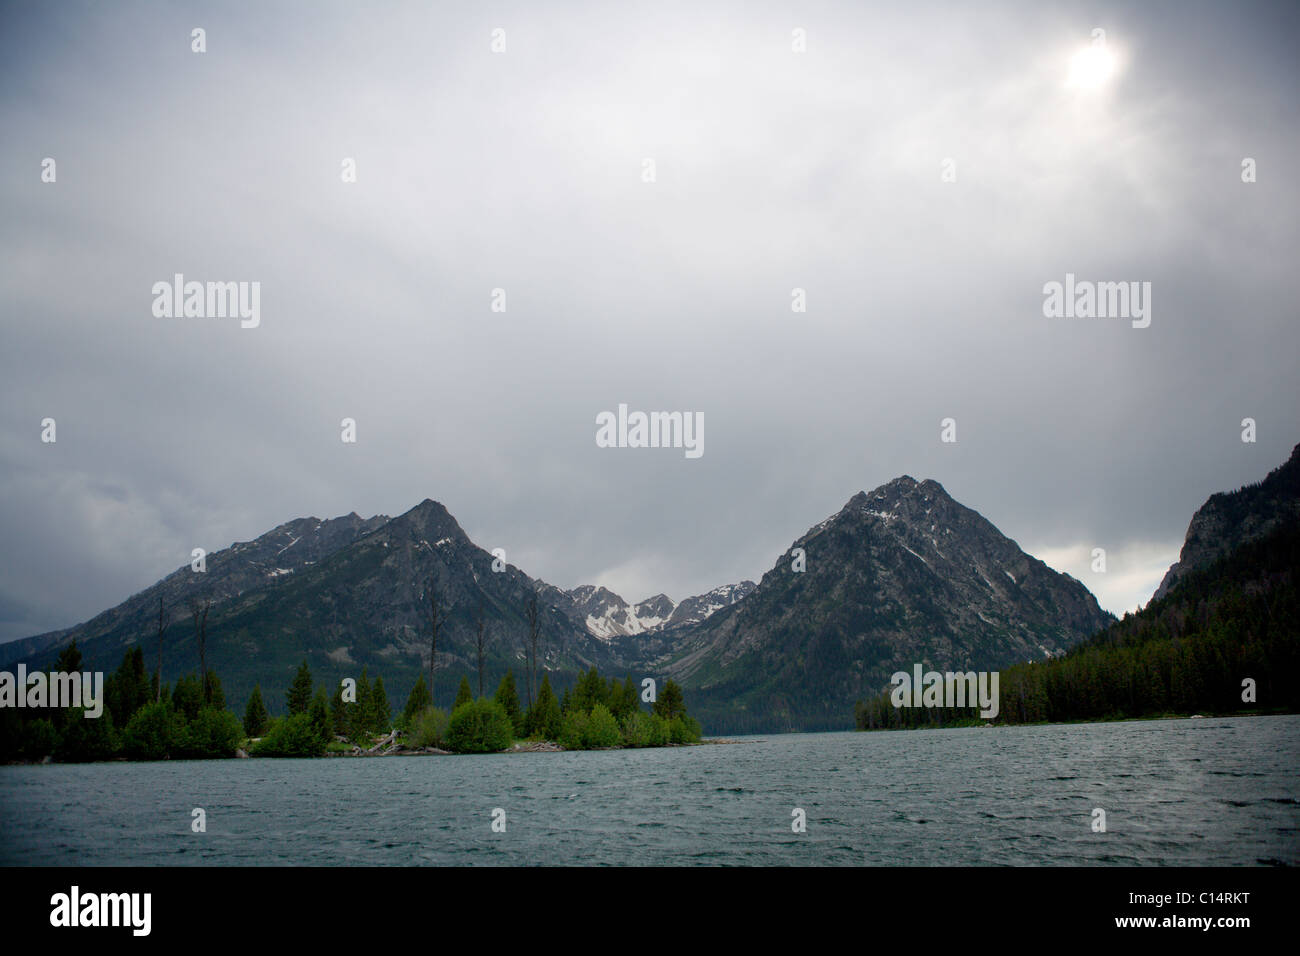 A lake view of the Grand Tetons. Stock Photo